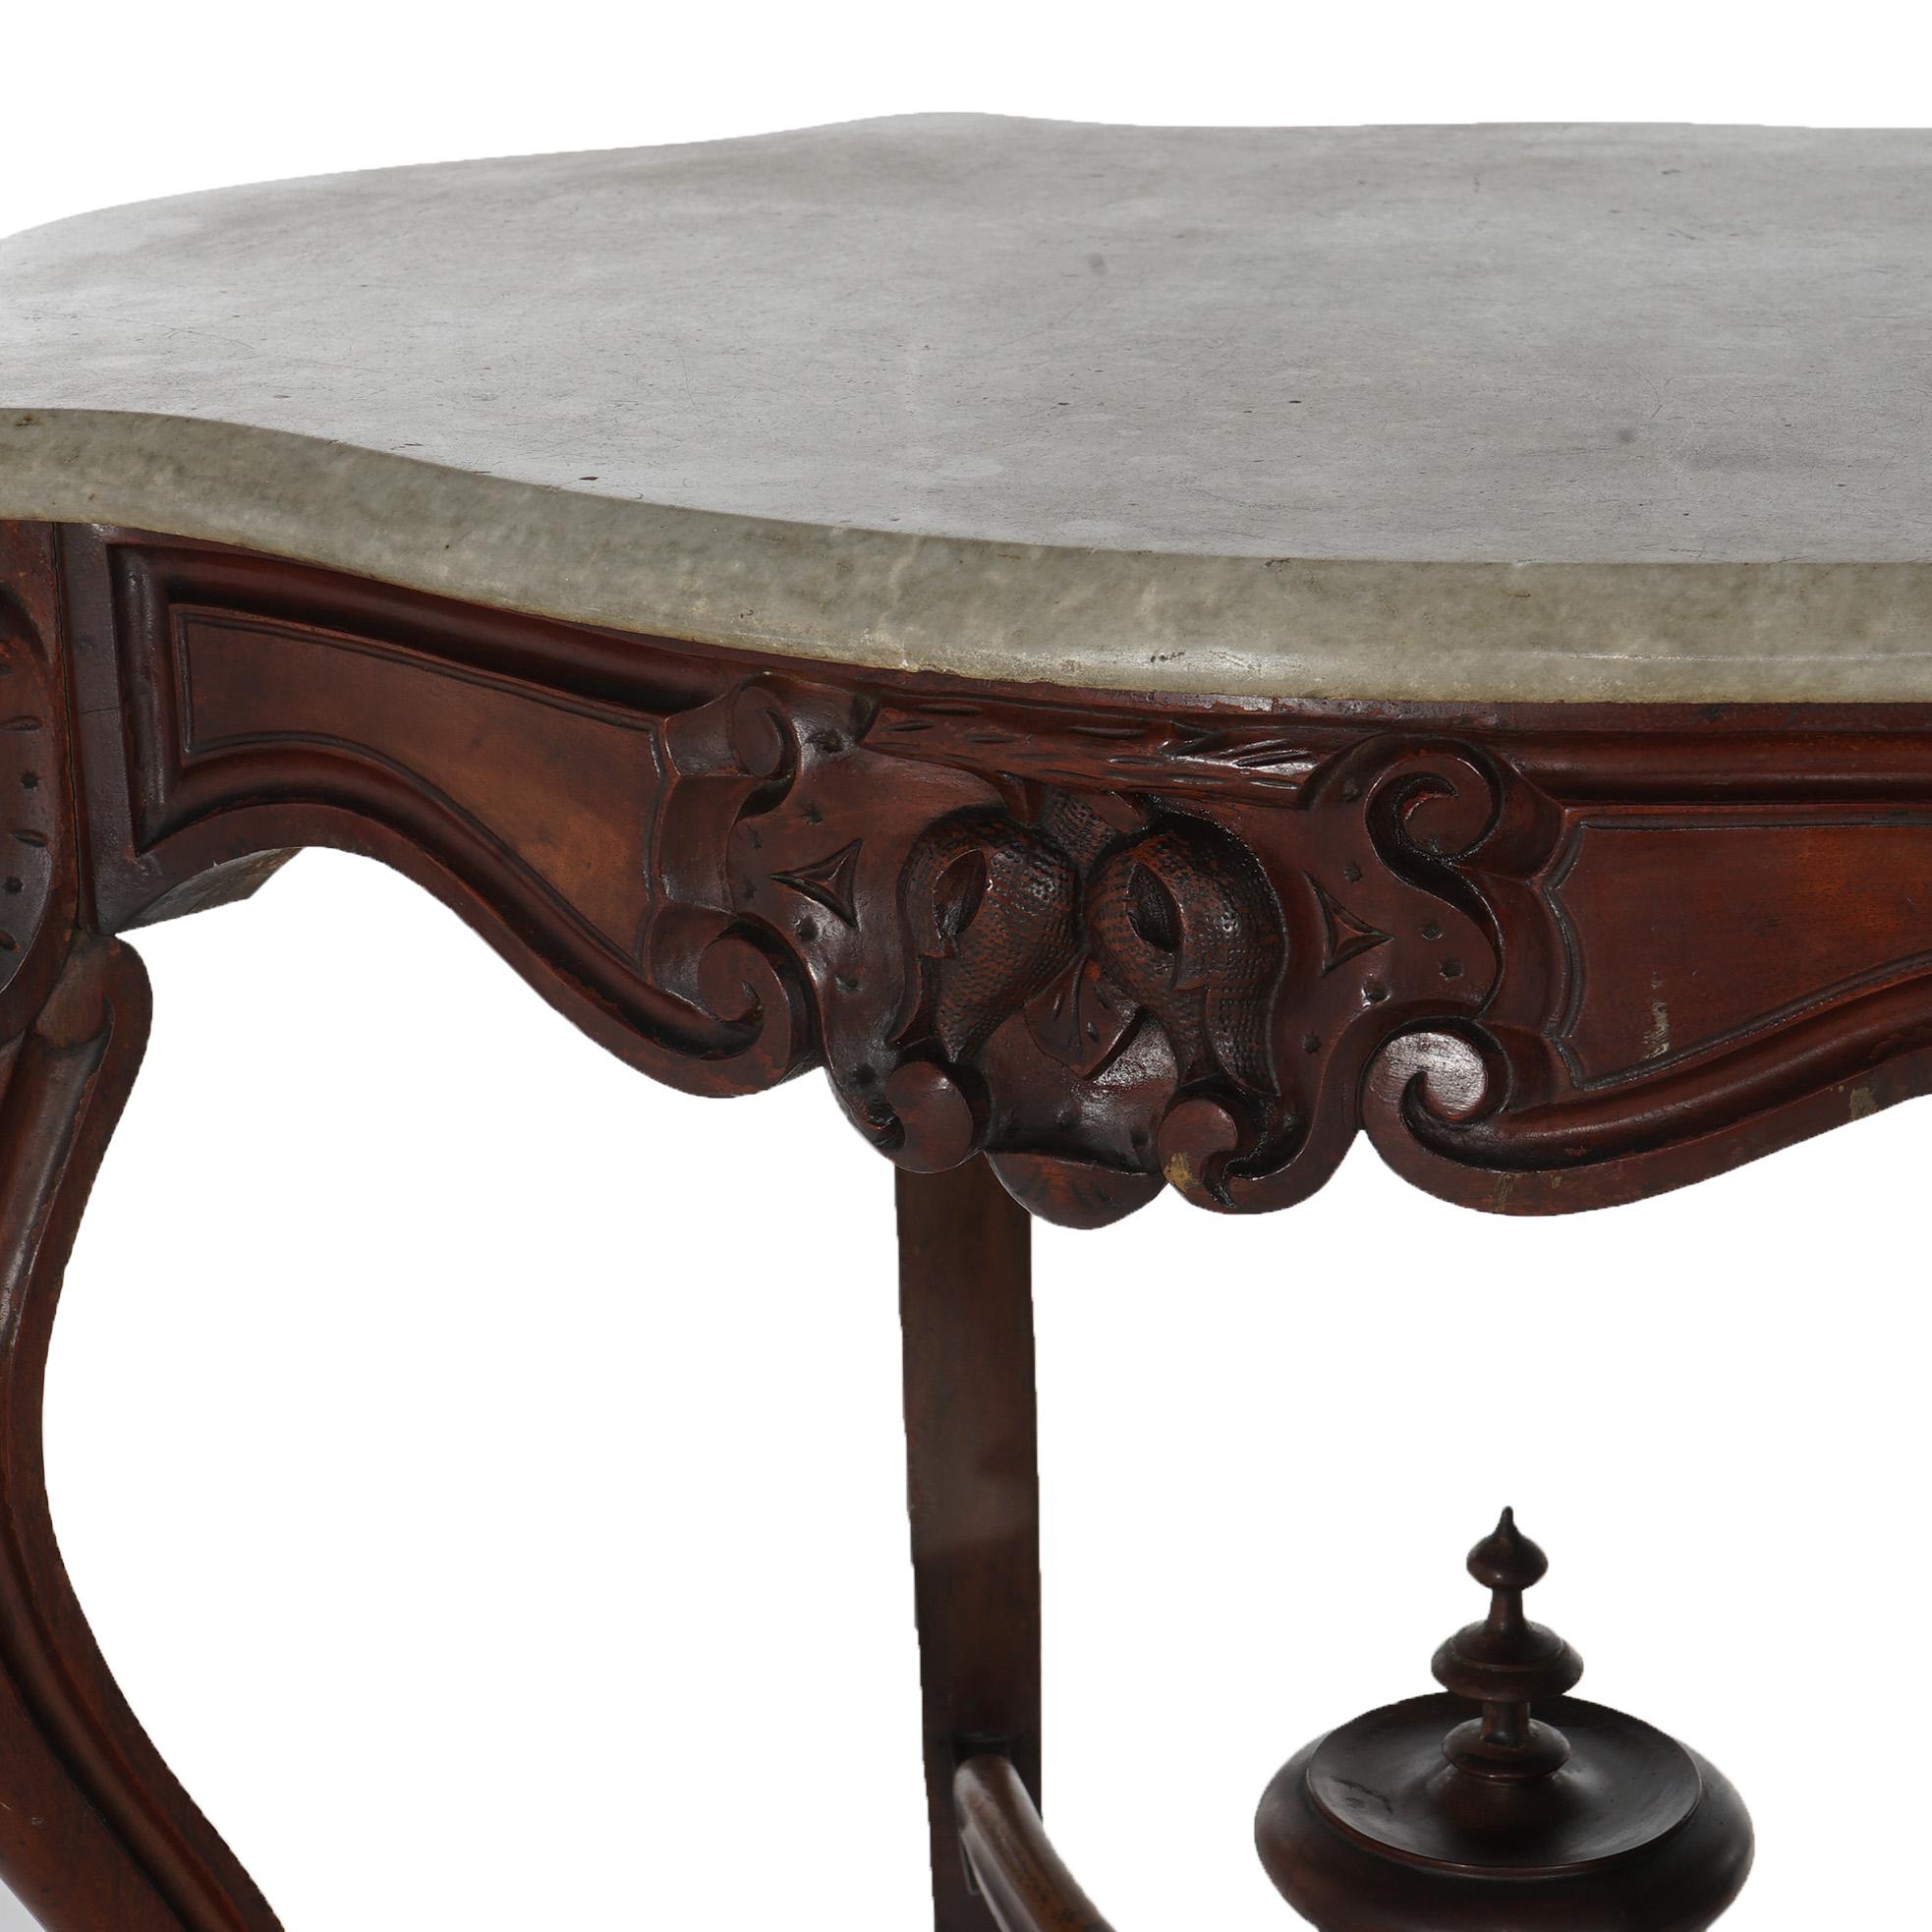 Antique Victorian Rococo Carved Walnut & Marble Top Parlor Table C1800 For Sale 8